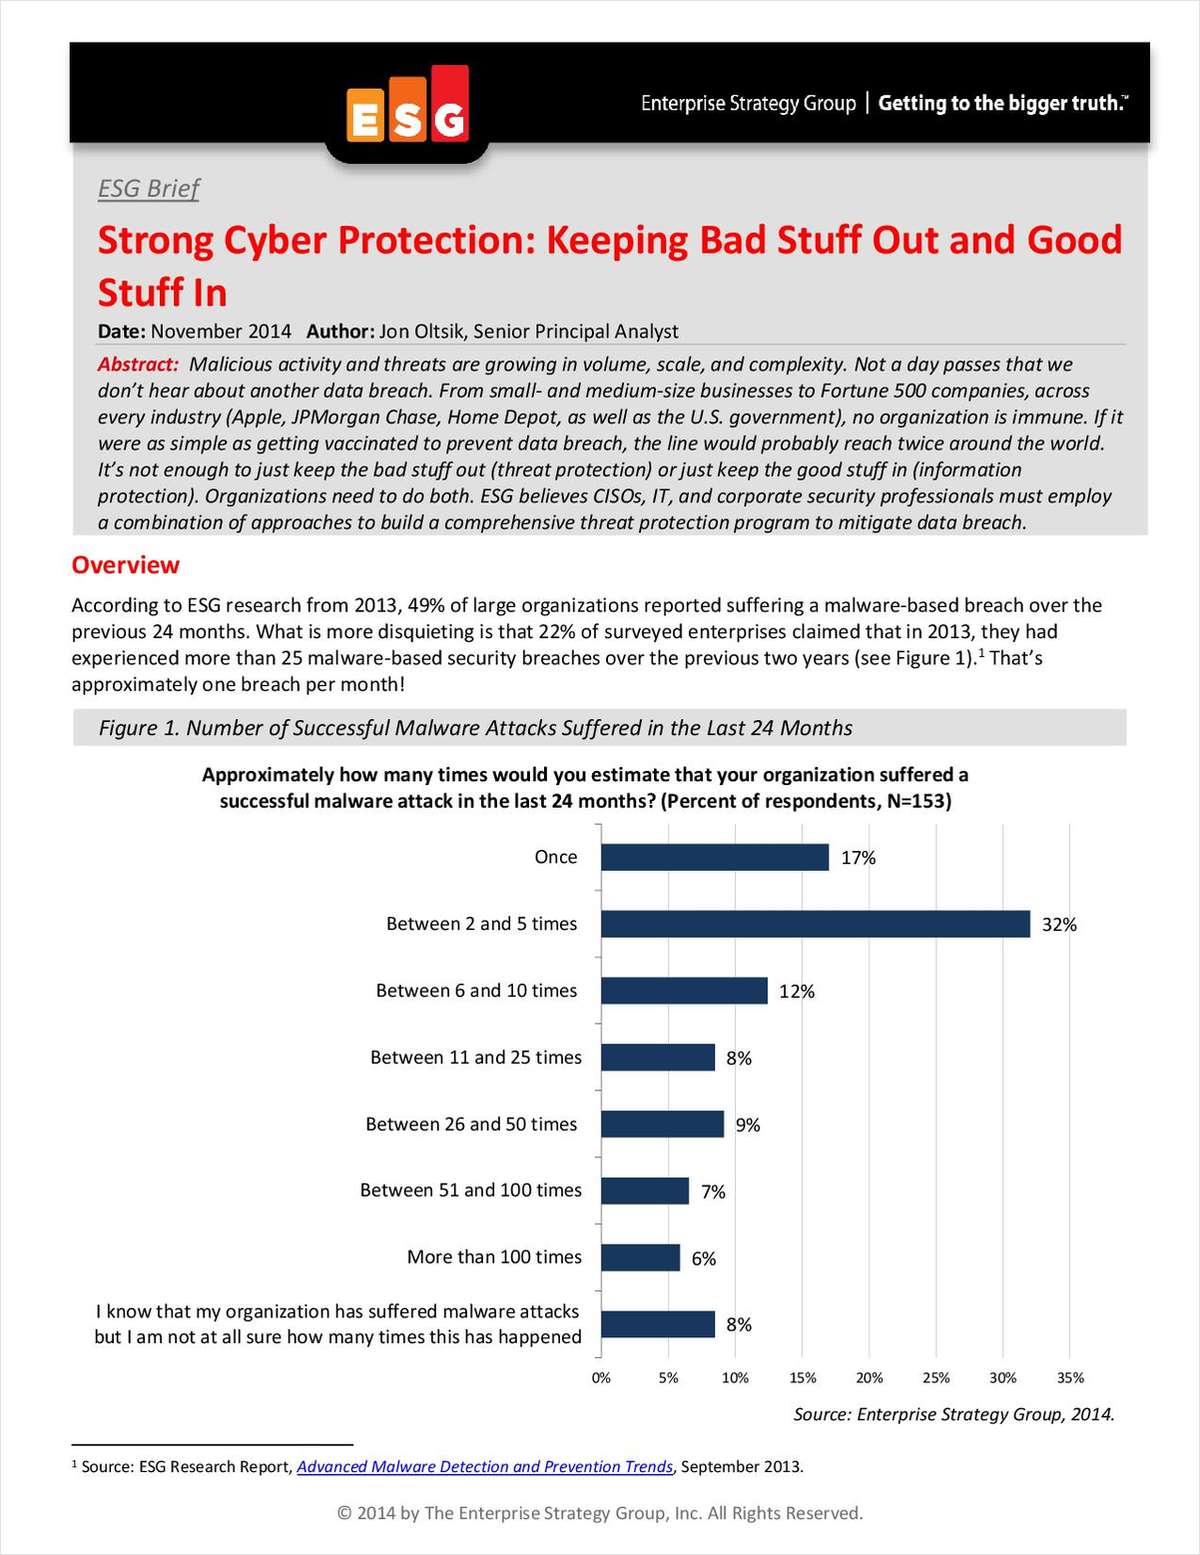 Strong Cyber Protection: Keeping Bad Stuff Out and Good Stuff In